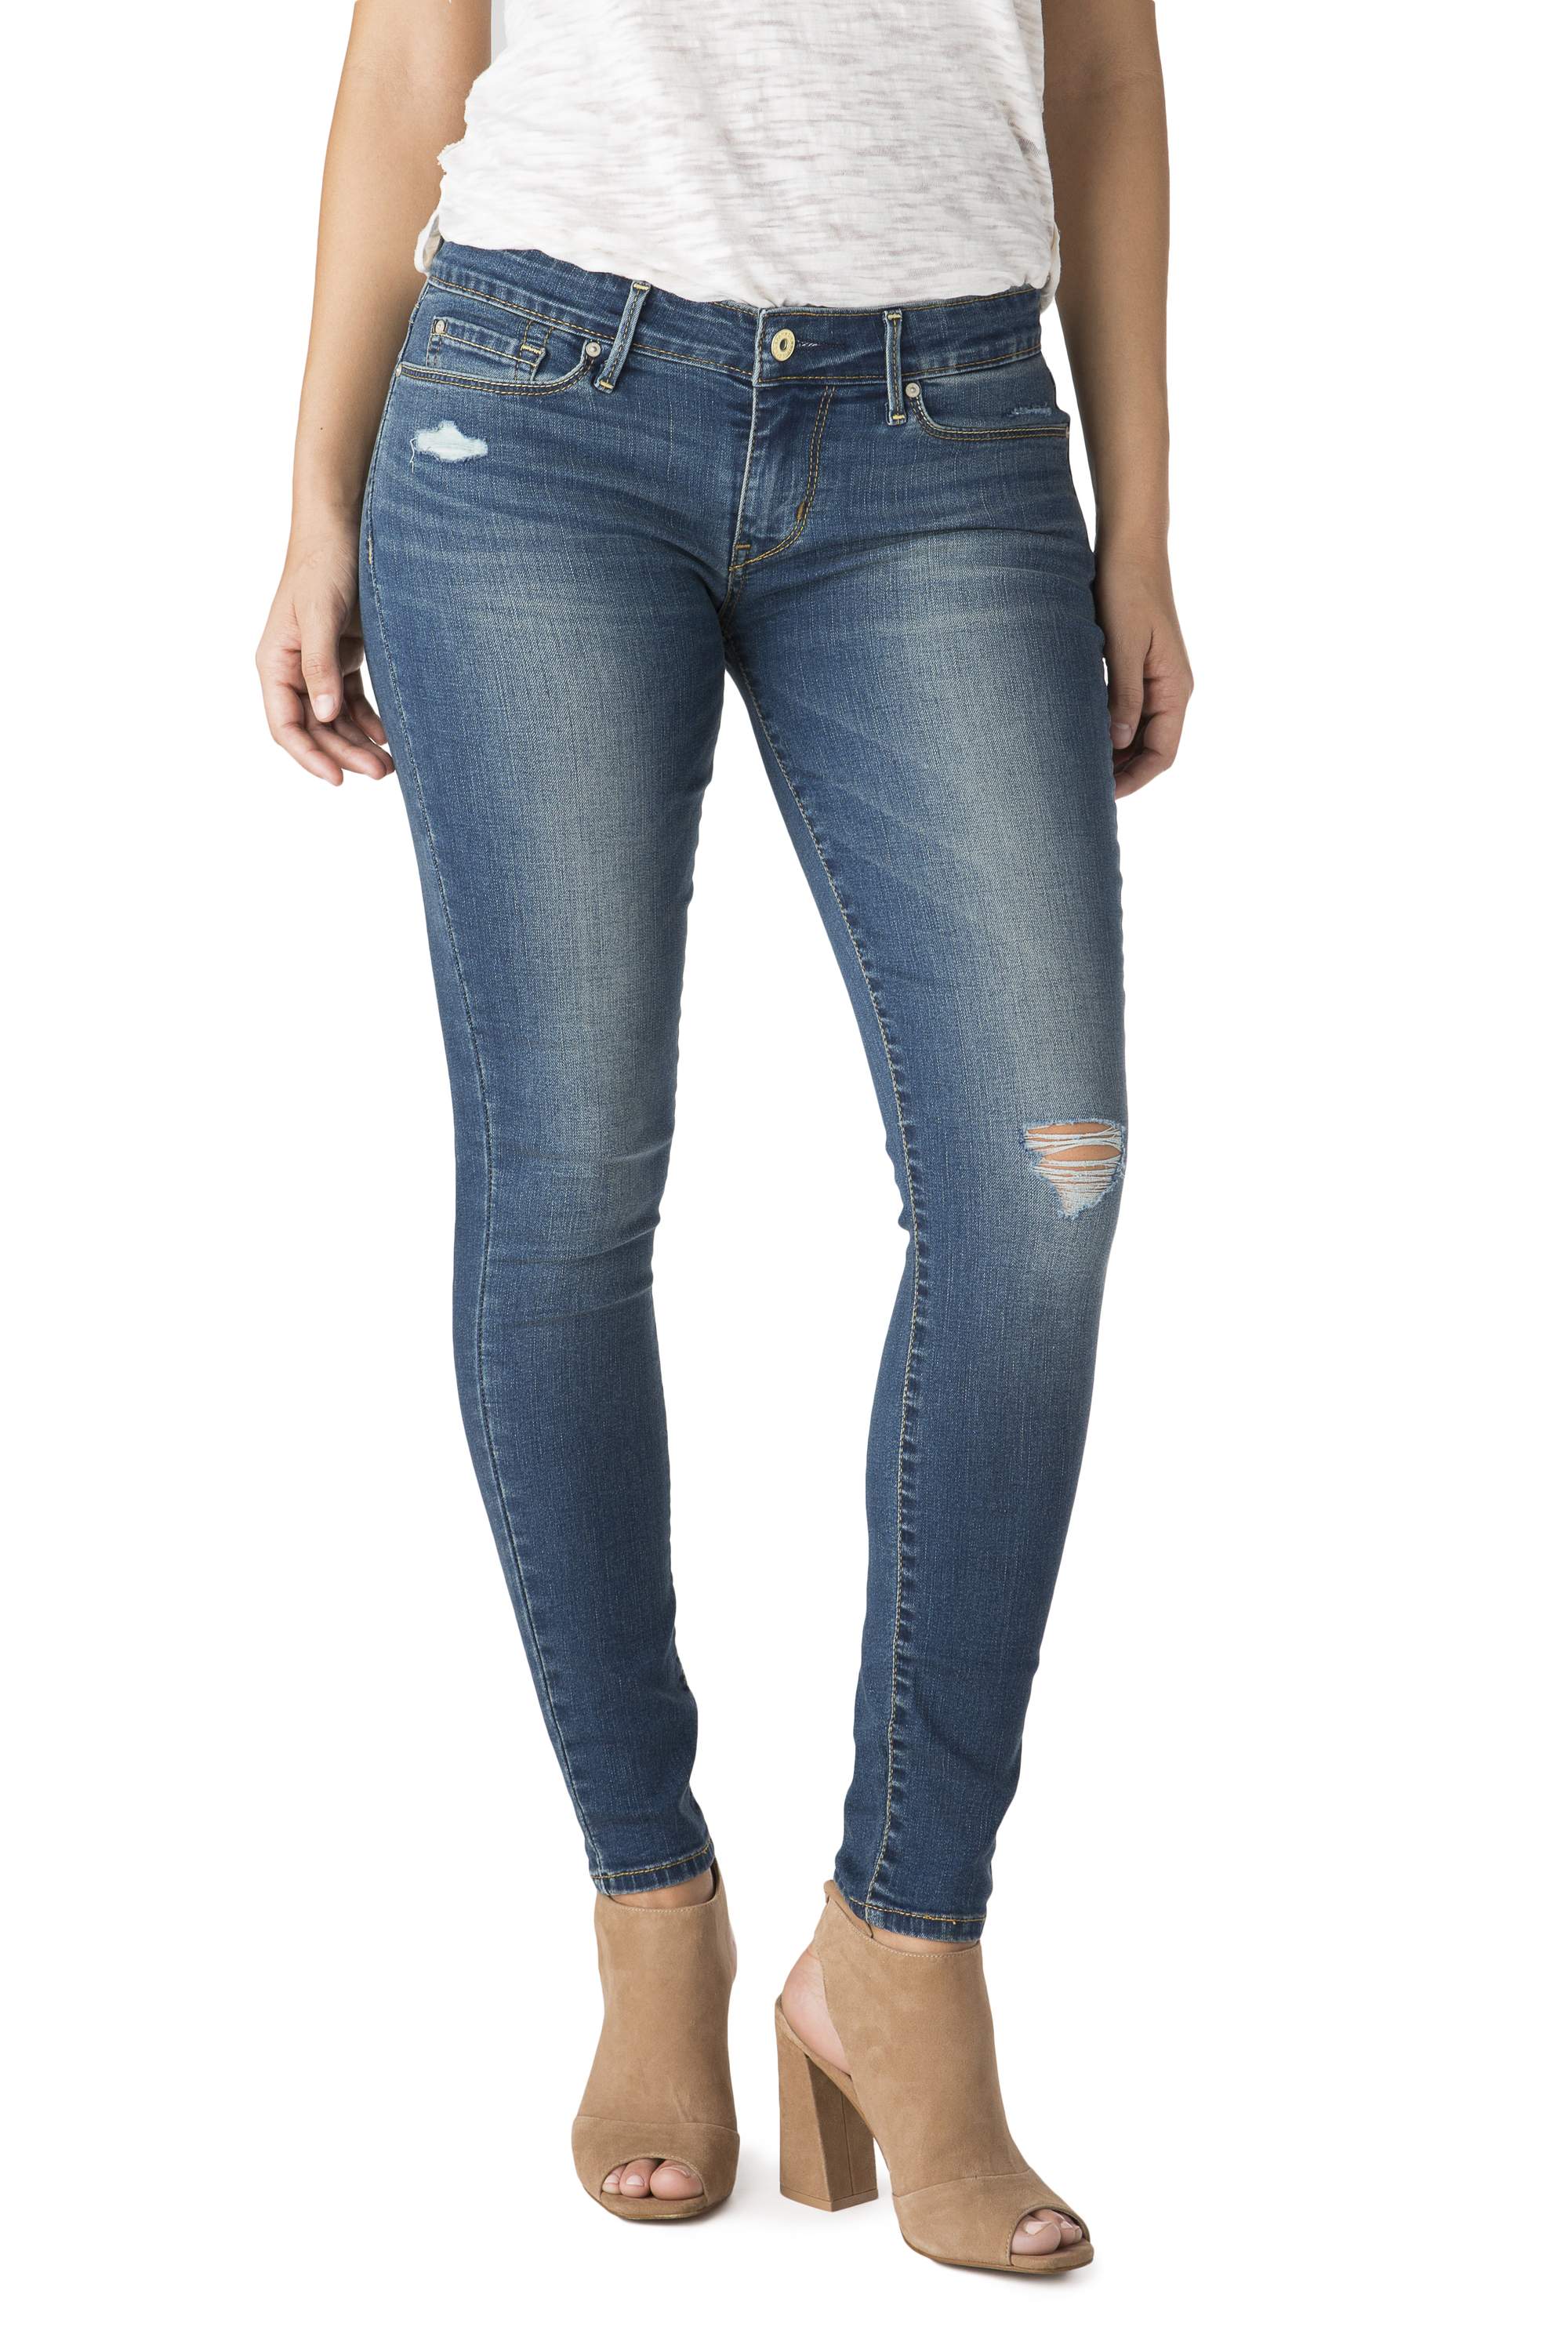 Signature by Levi Strauss & Co. Women's Low Rise Jeggings - image 1 of 12